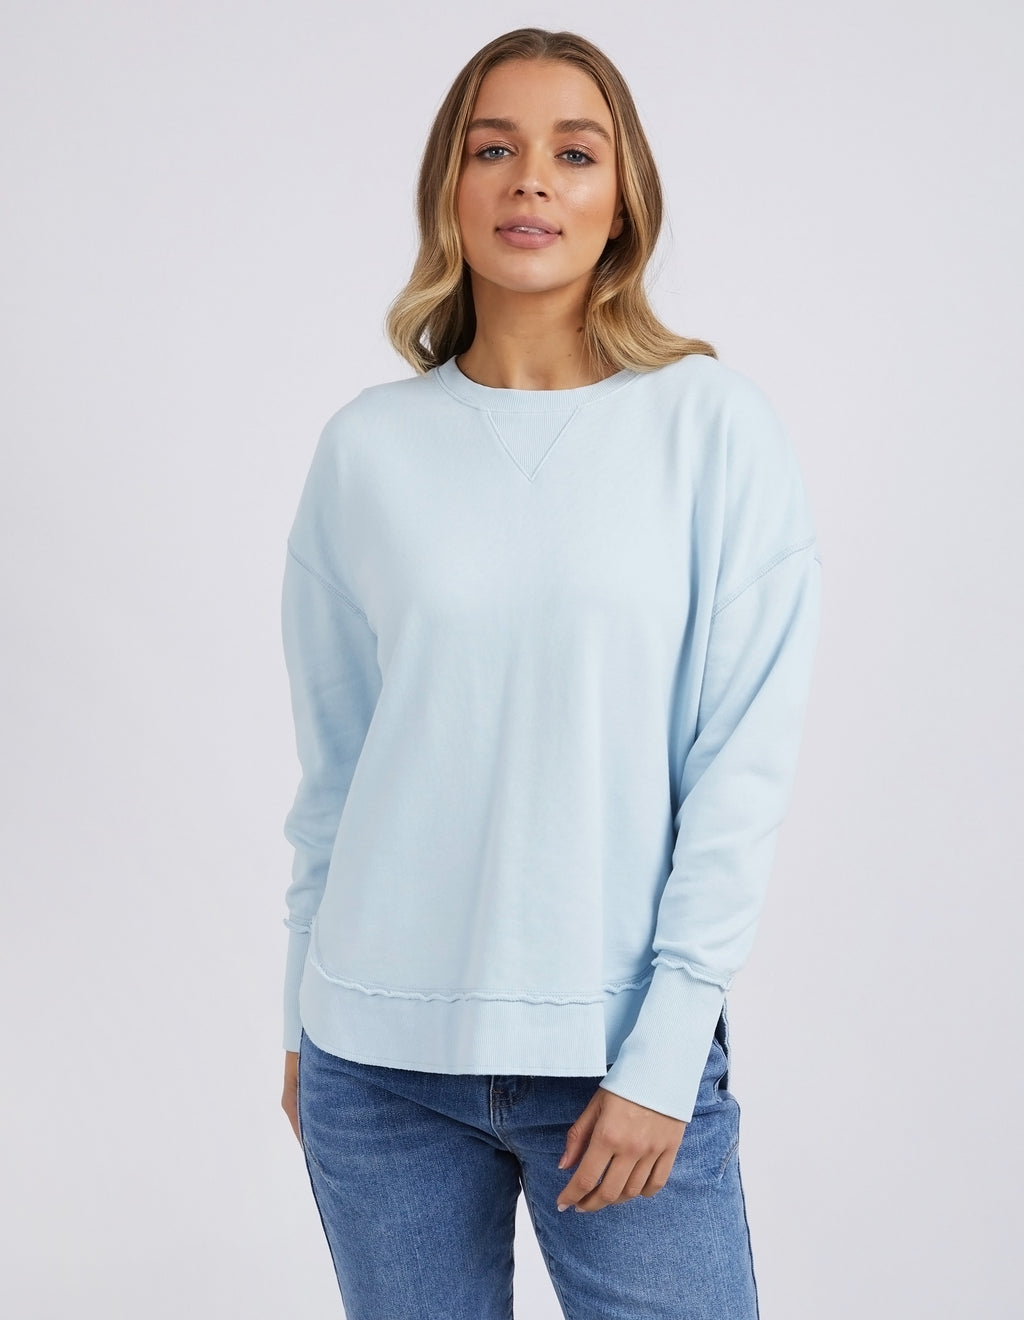 delilah cotton knit crew jumper by foxwood